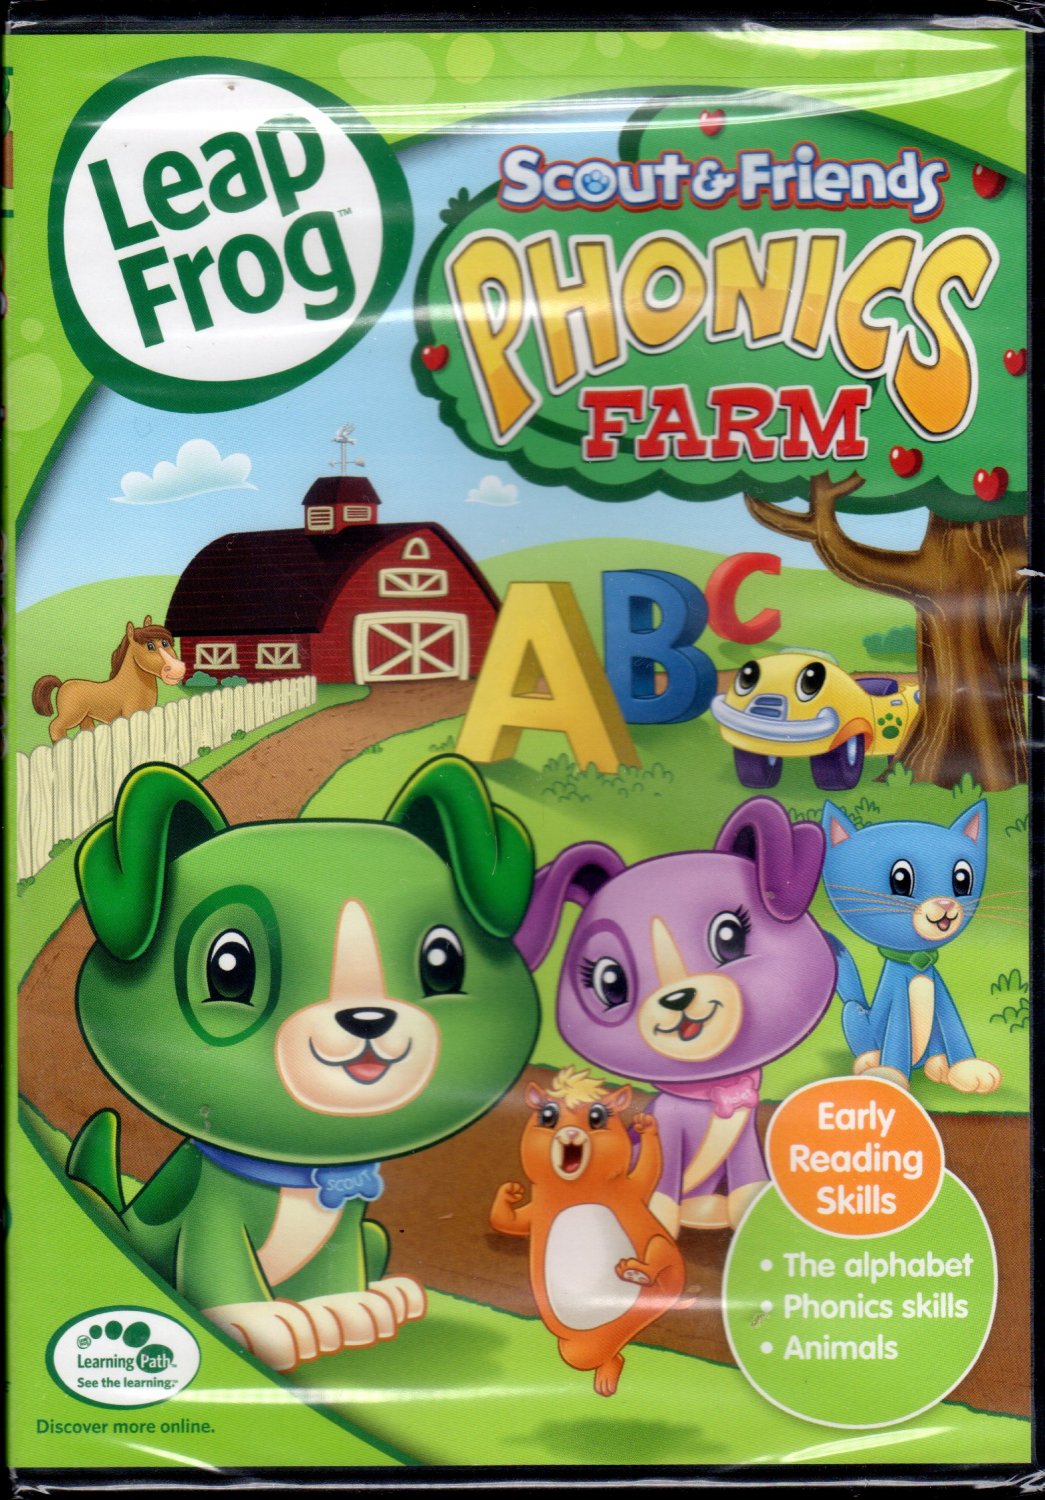 Leapfrog Scout And Friends Phonics Farm Dvd Brand New 